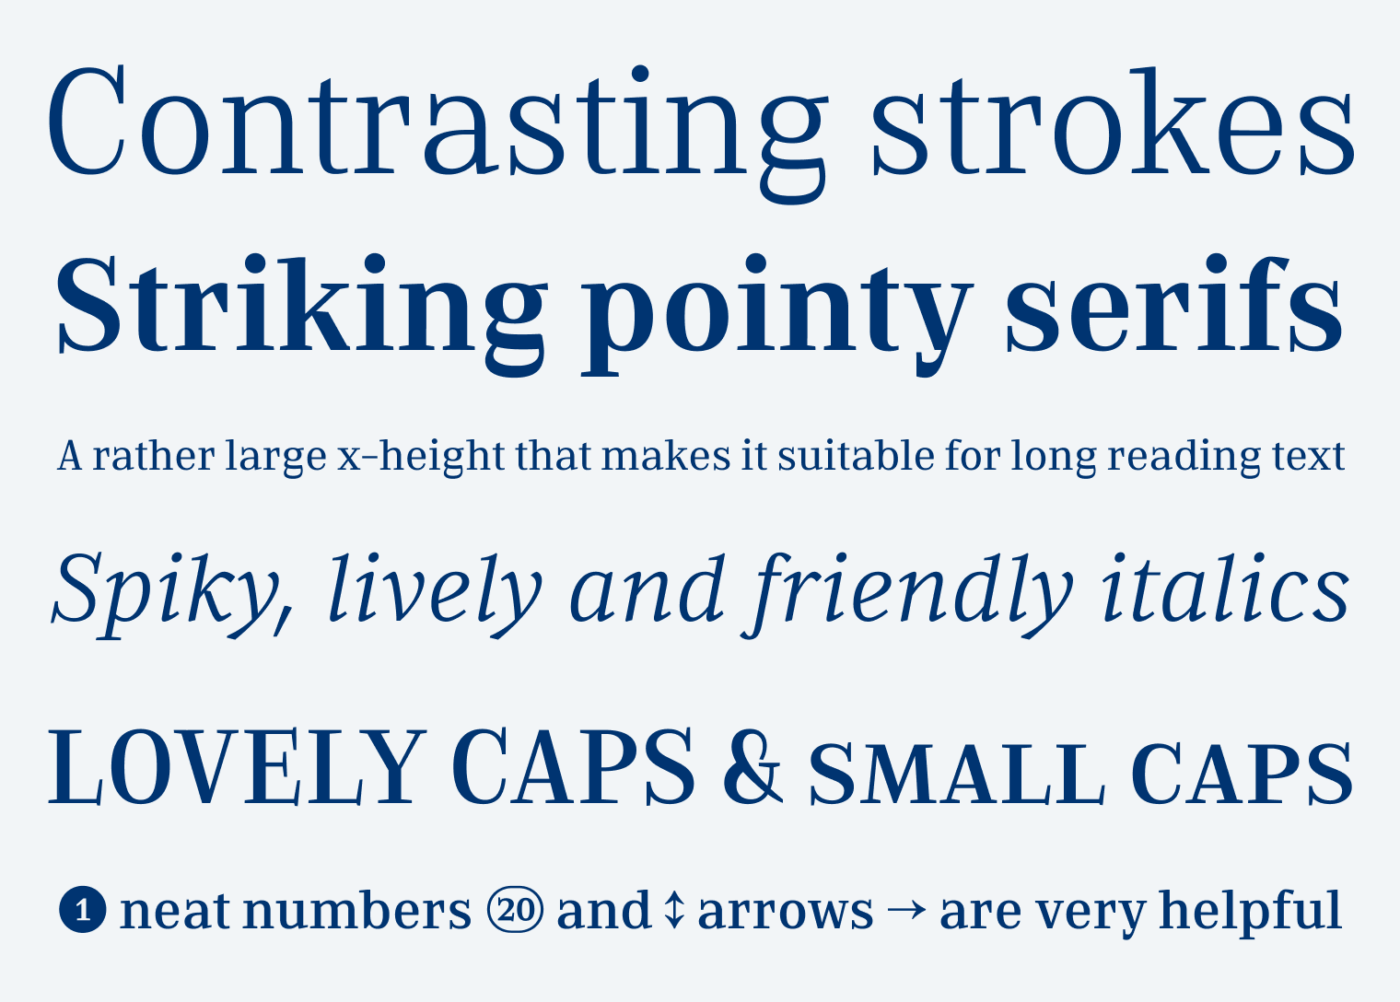 Contrasting strokes Striking pointy serifs A rather large x-height that makes it suitable for long reading text Spiky, lively and friendly italics LOVELY CAPS & SMALL CAPS neat numbers @ and & arrows are very helpful